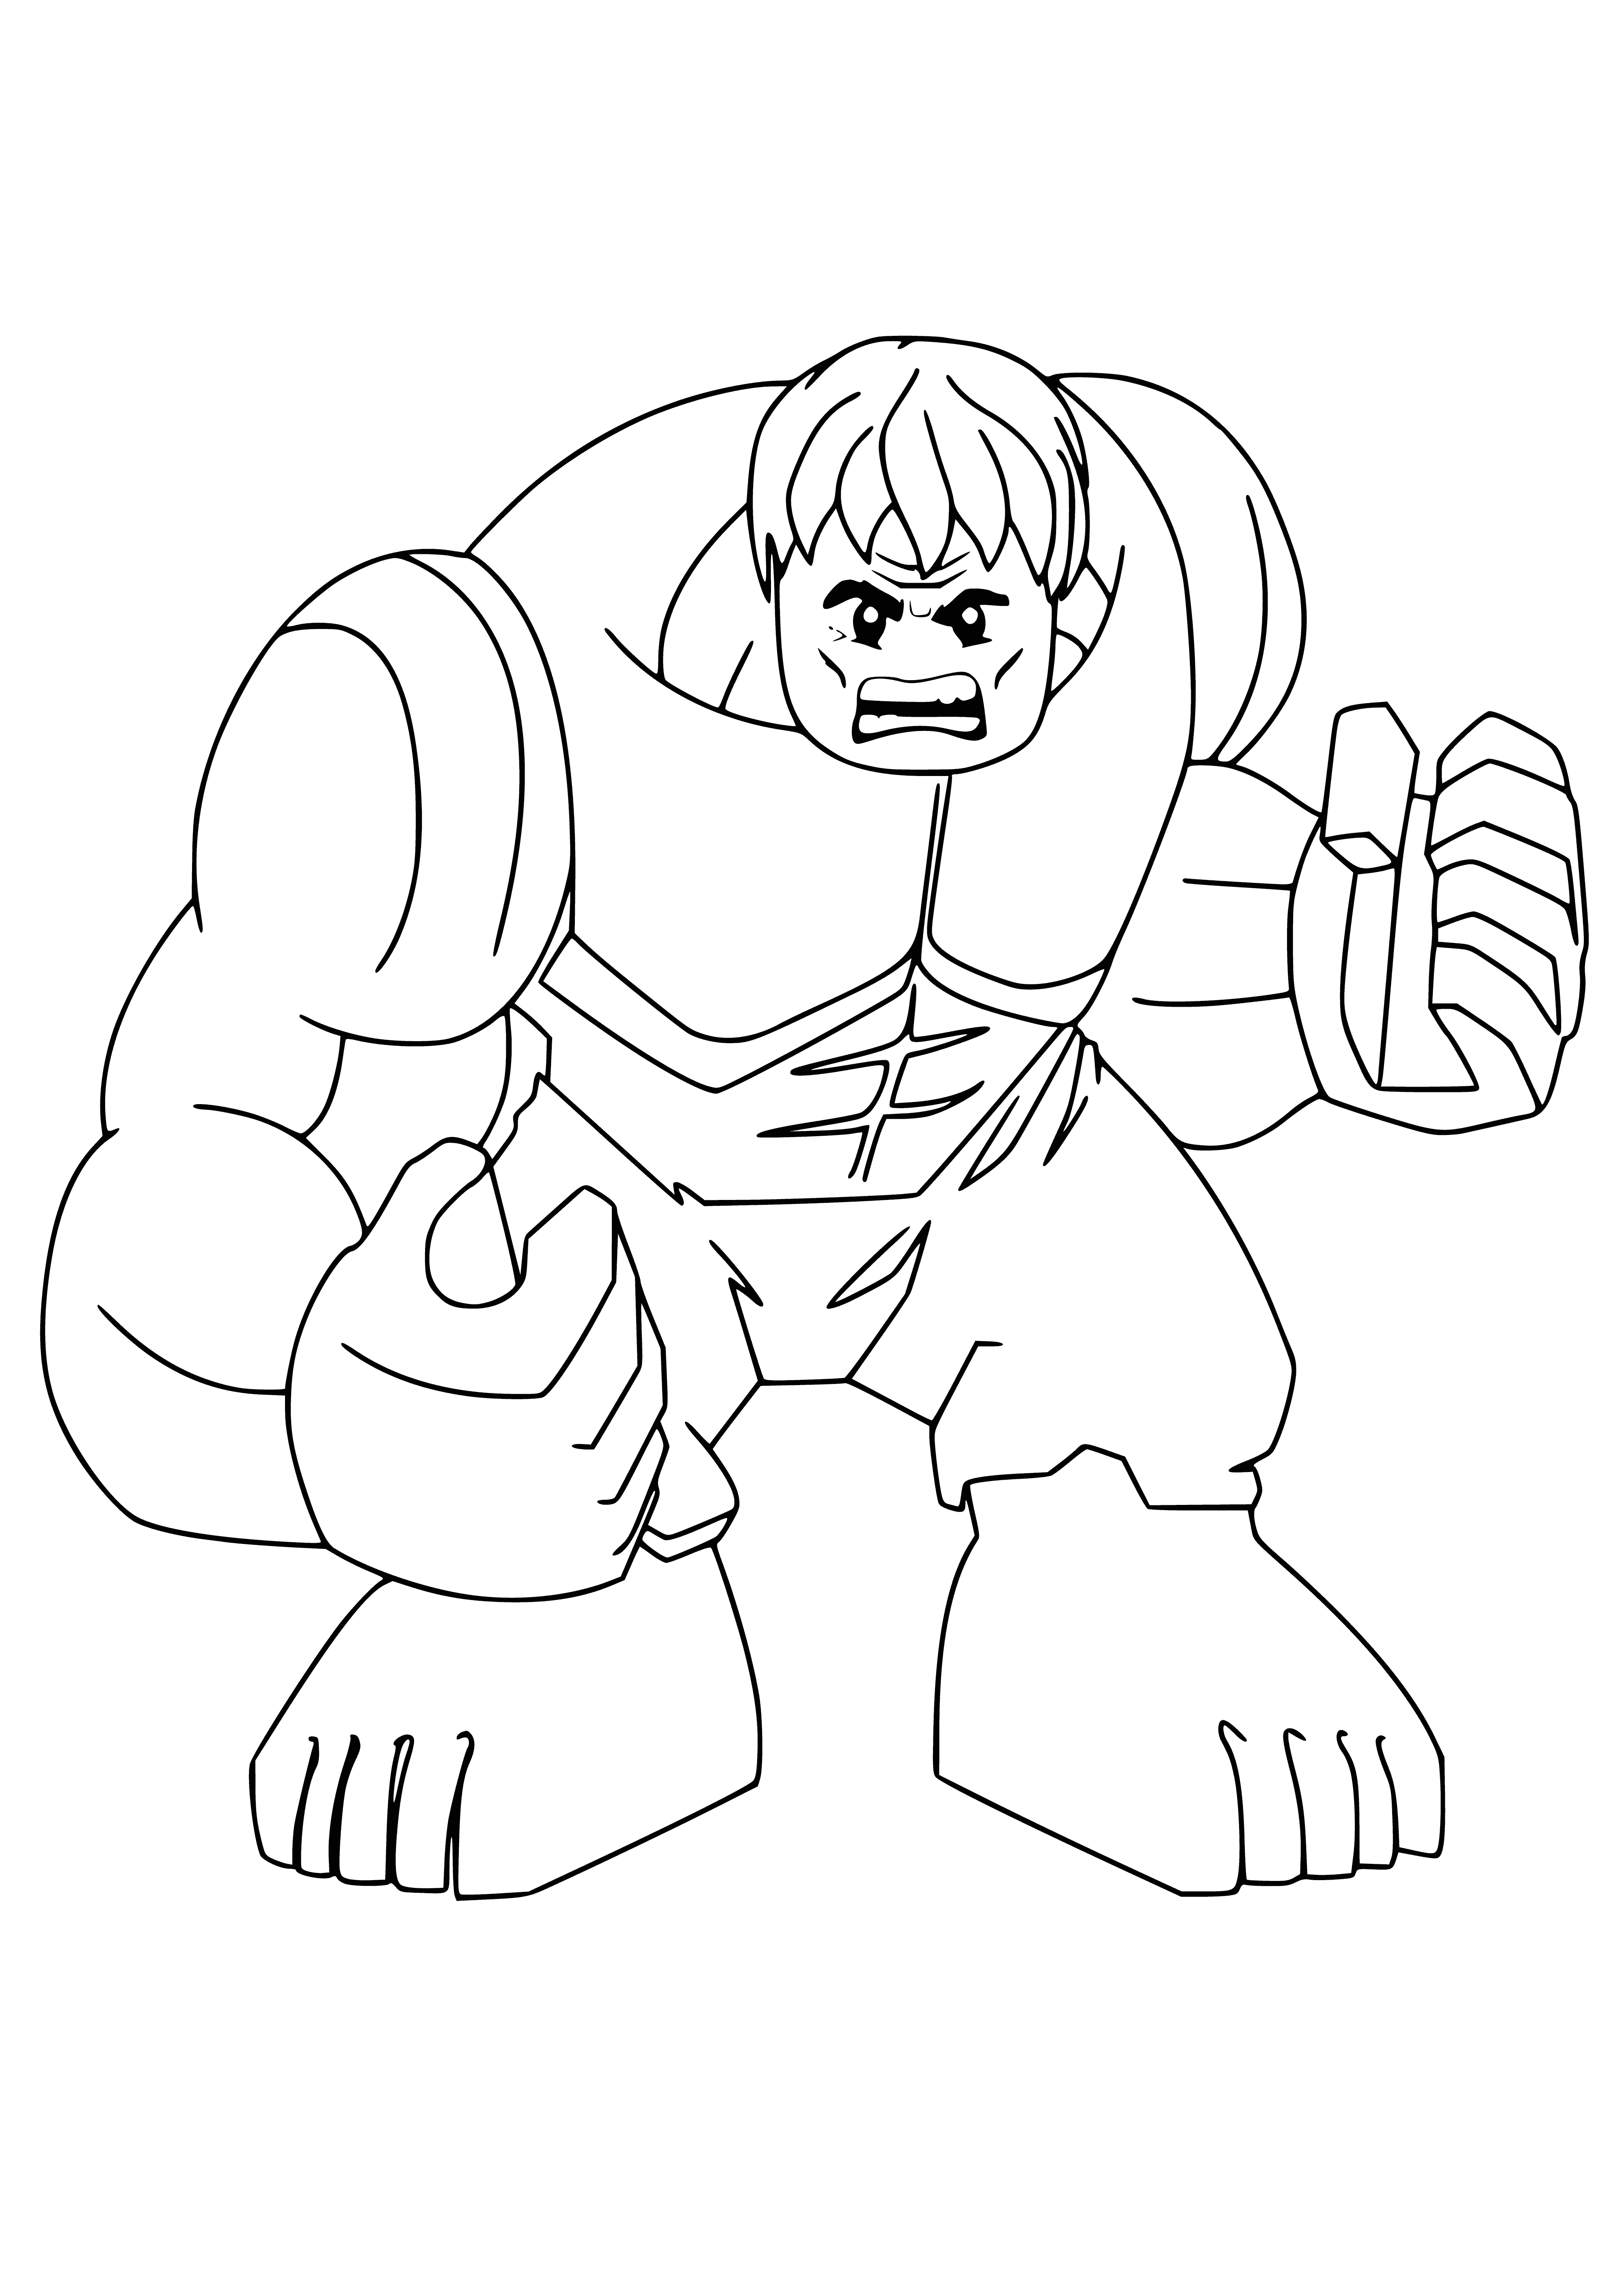 coloring page: Green figure w/ big muscles has black eyes, mouth, hair. Wears purple/yellow "H" shirt, purple shorts & black boots. Holding dark gray hammer in right hand.